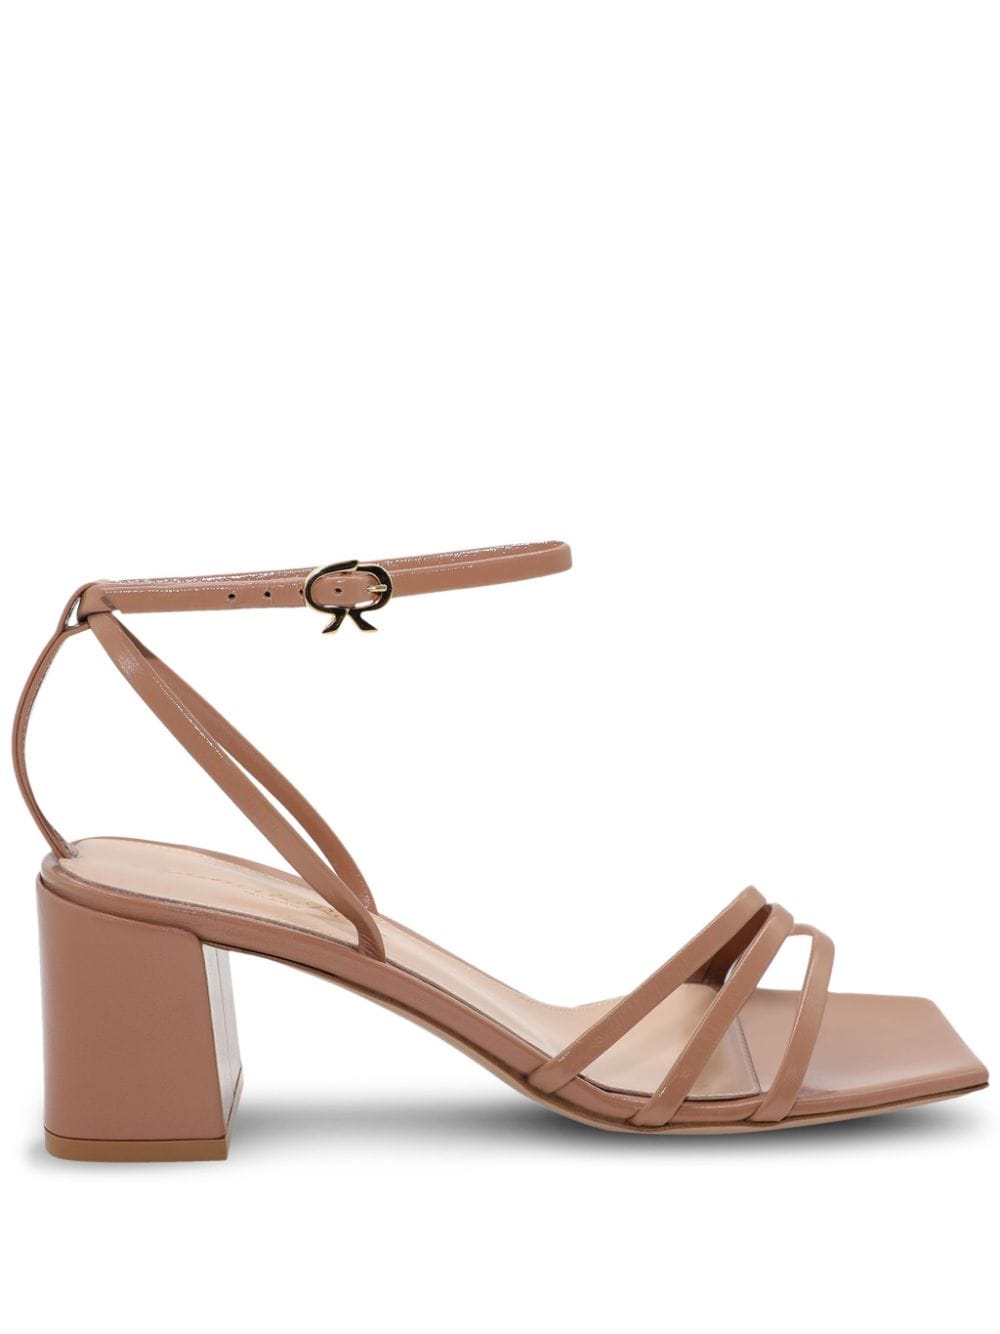 Gianvito Rossi Nuit 55mm Leather Sandals In 褐色